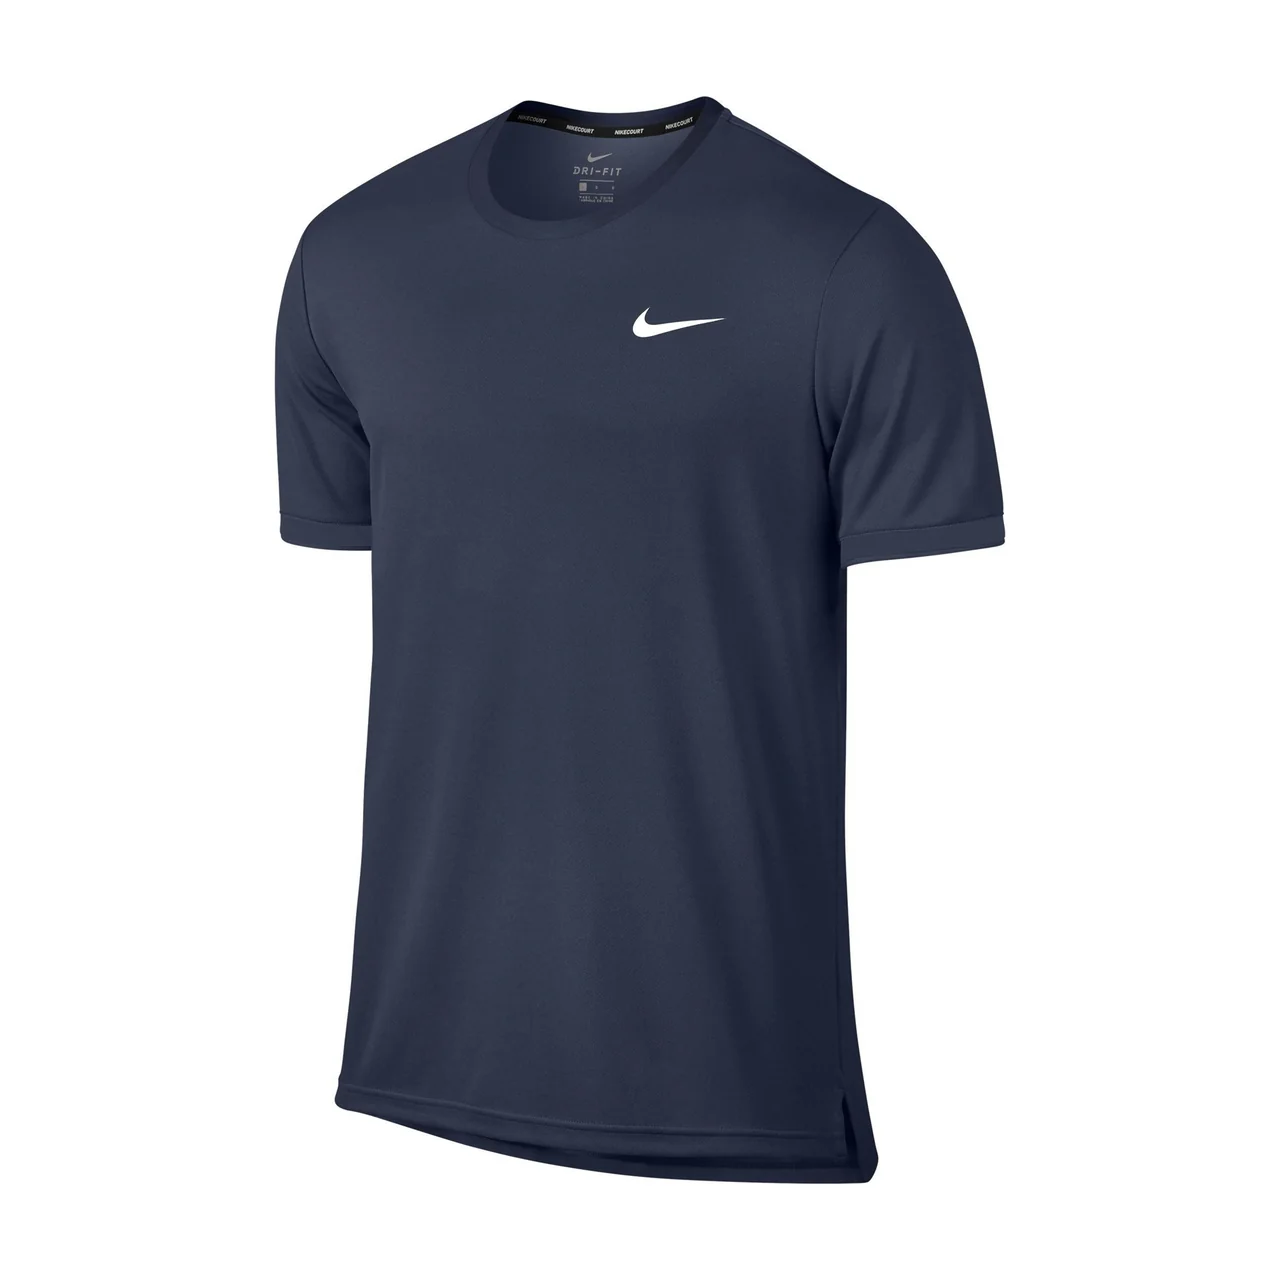 Nike Dry Top Team Navy Blue Size S